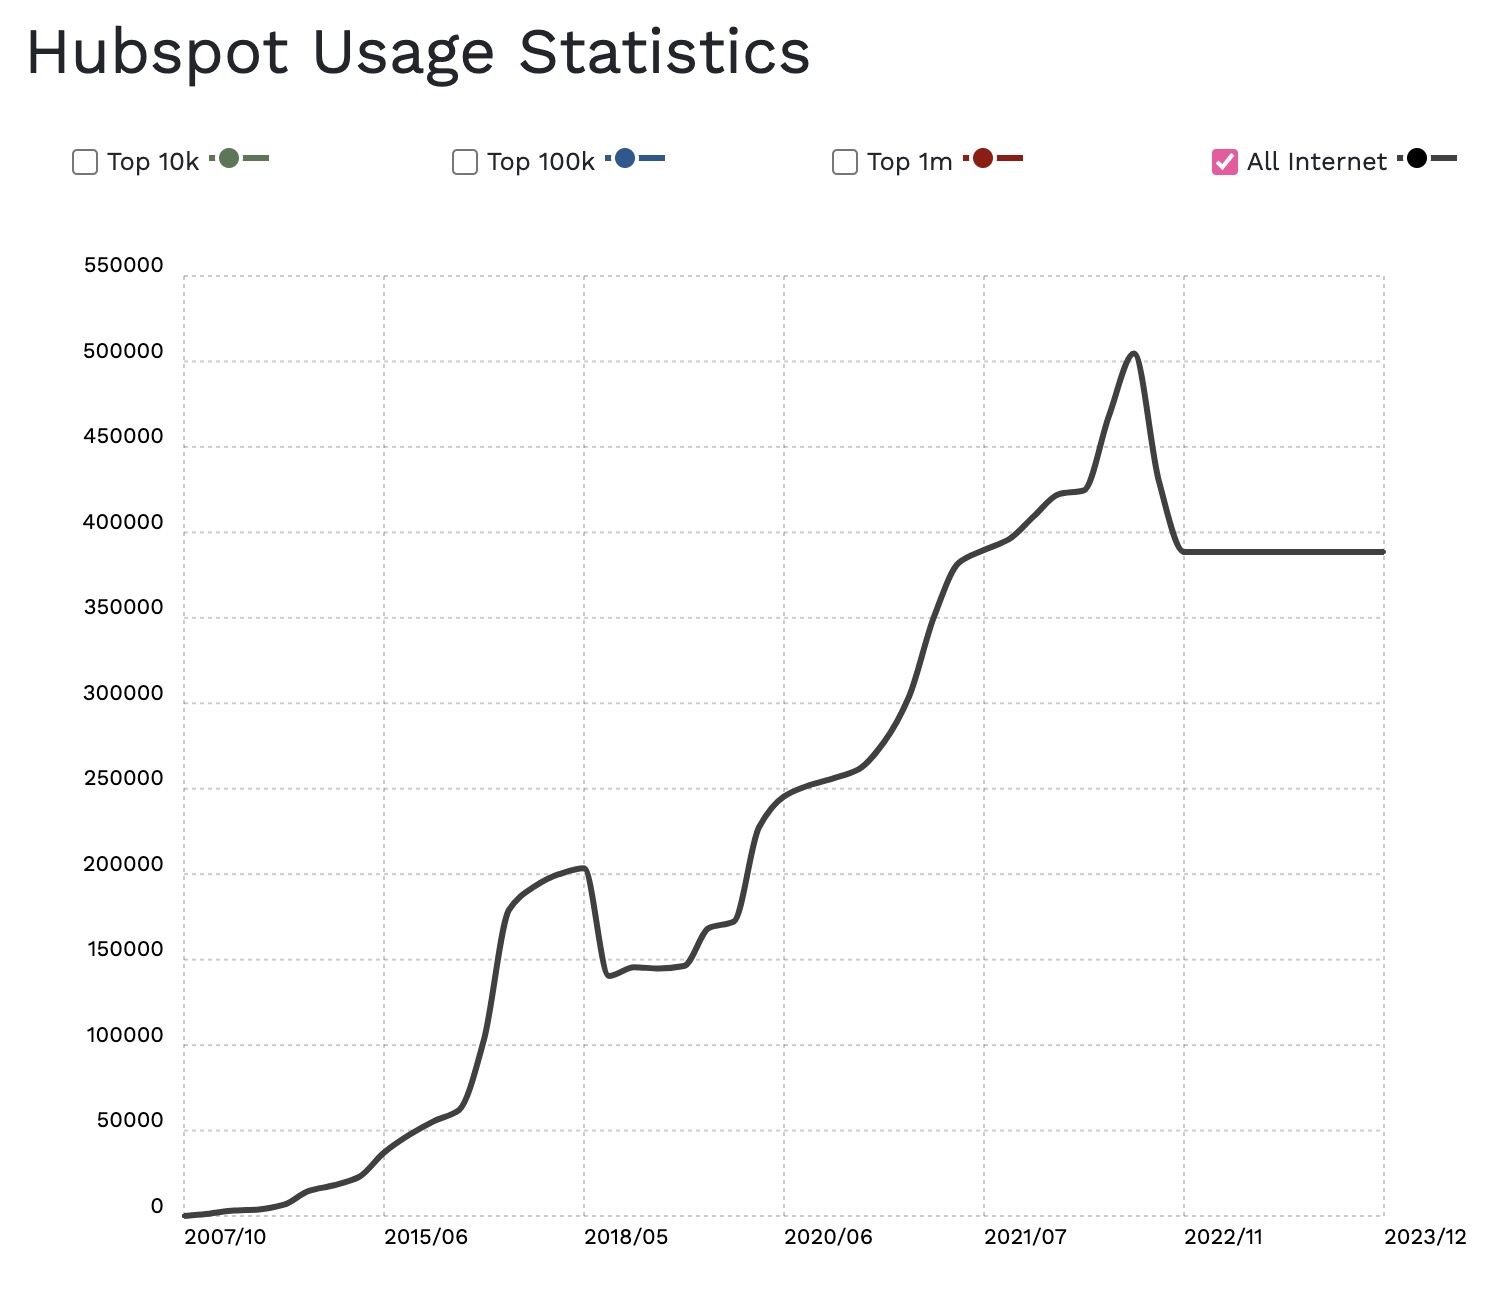 A line graph showing Hubspot usage has gone up over the years but experienced a decline in late 2021